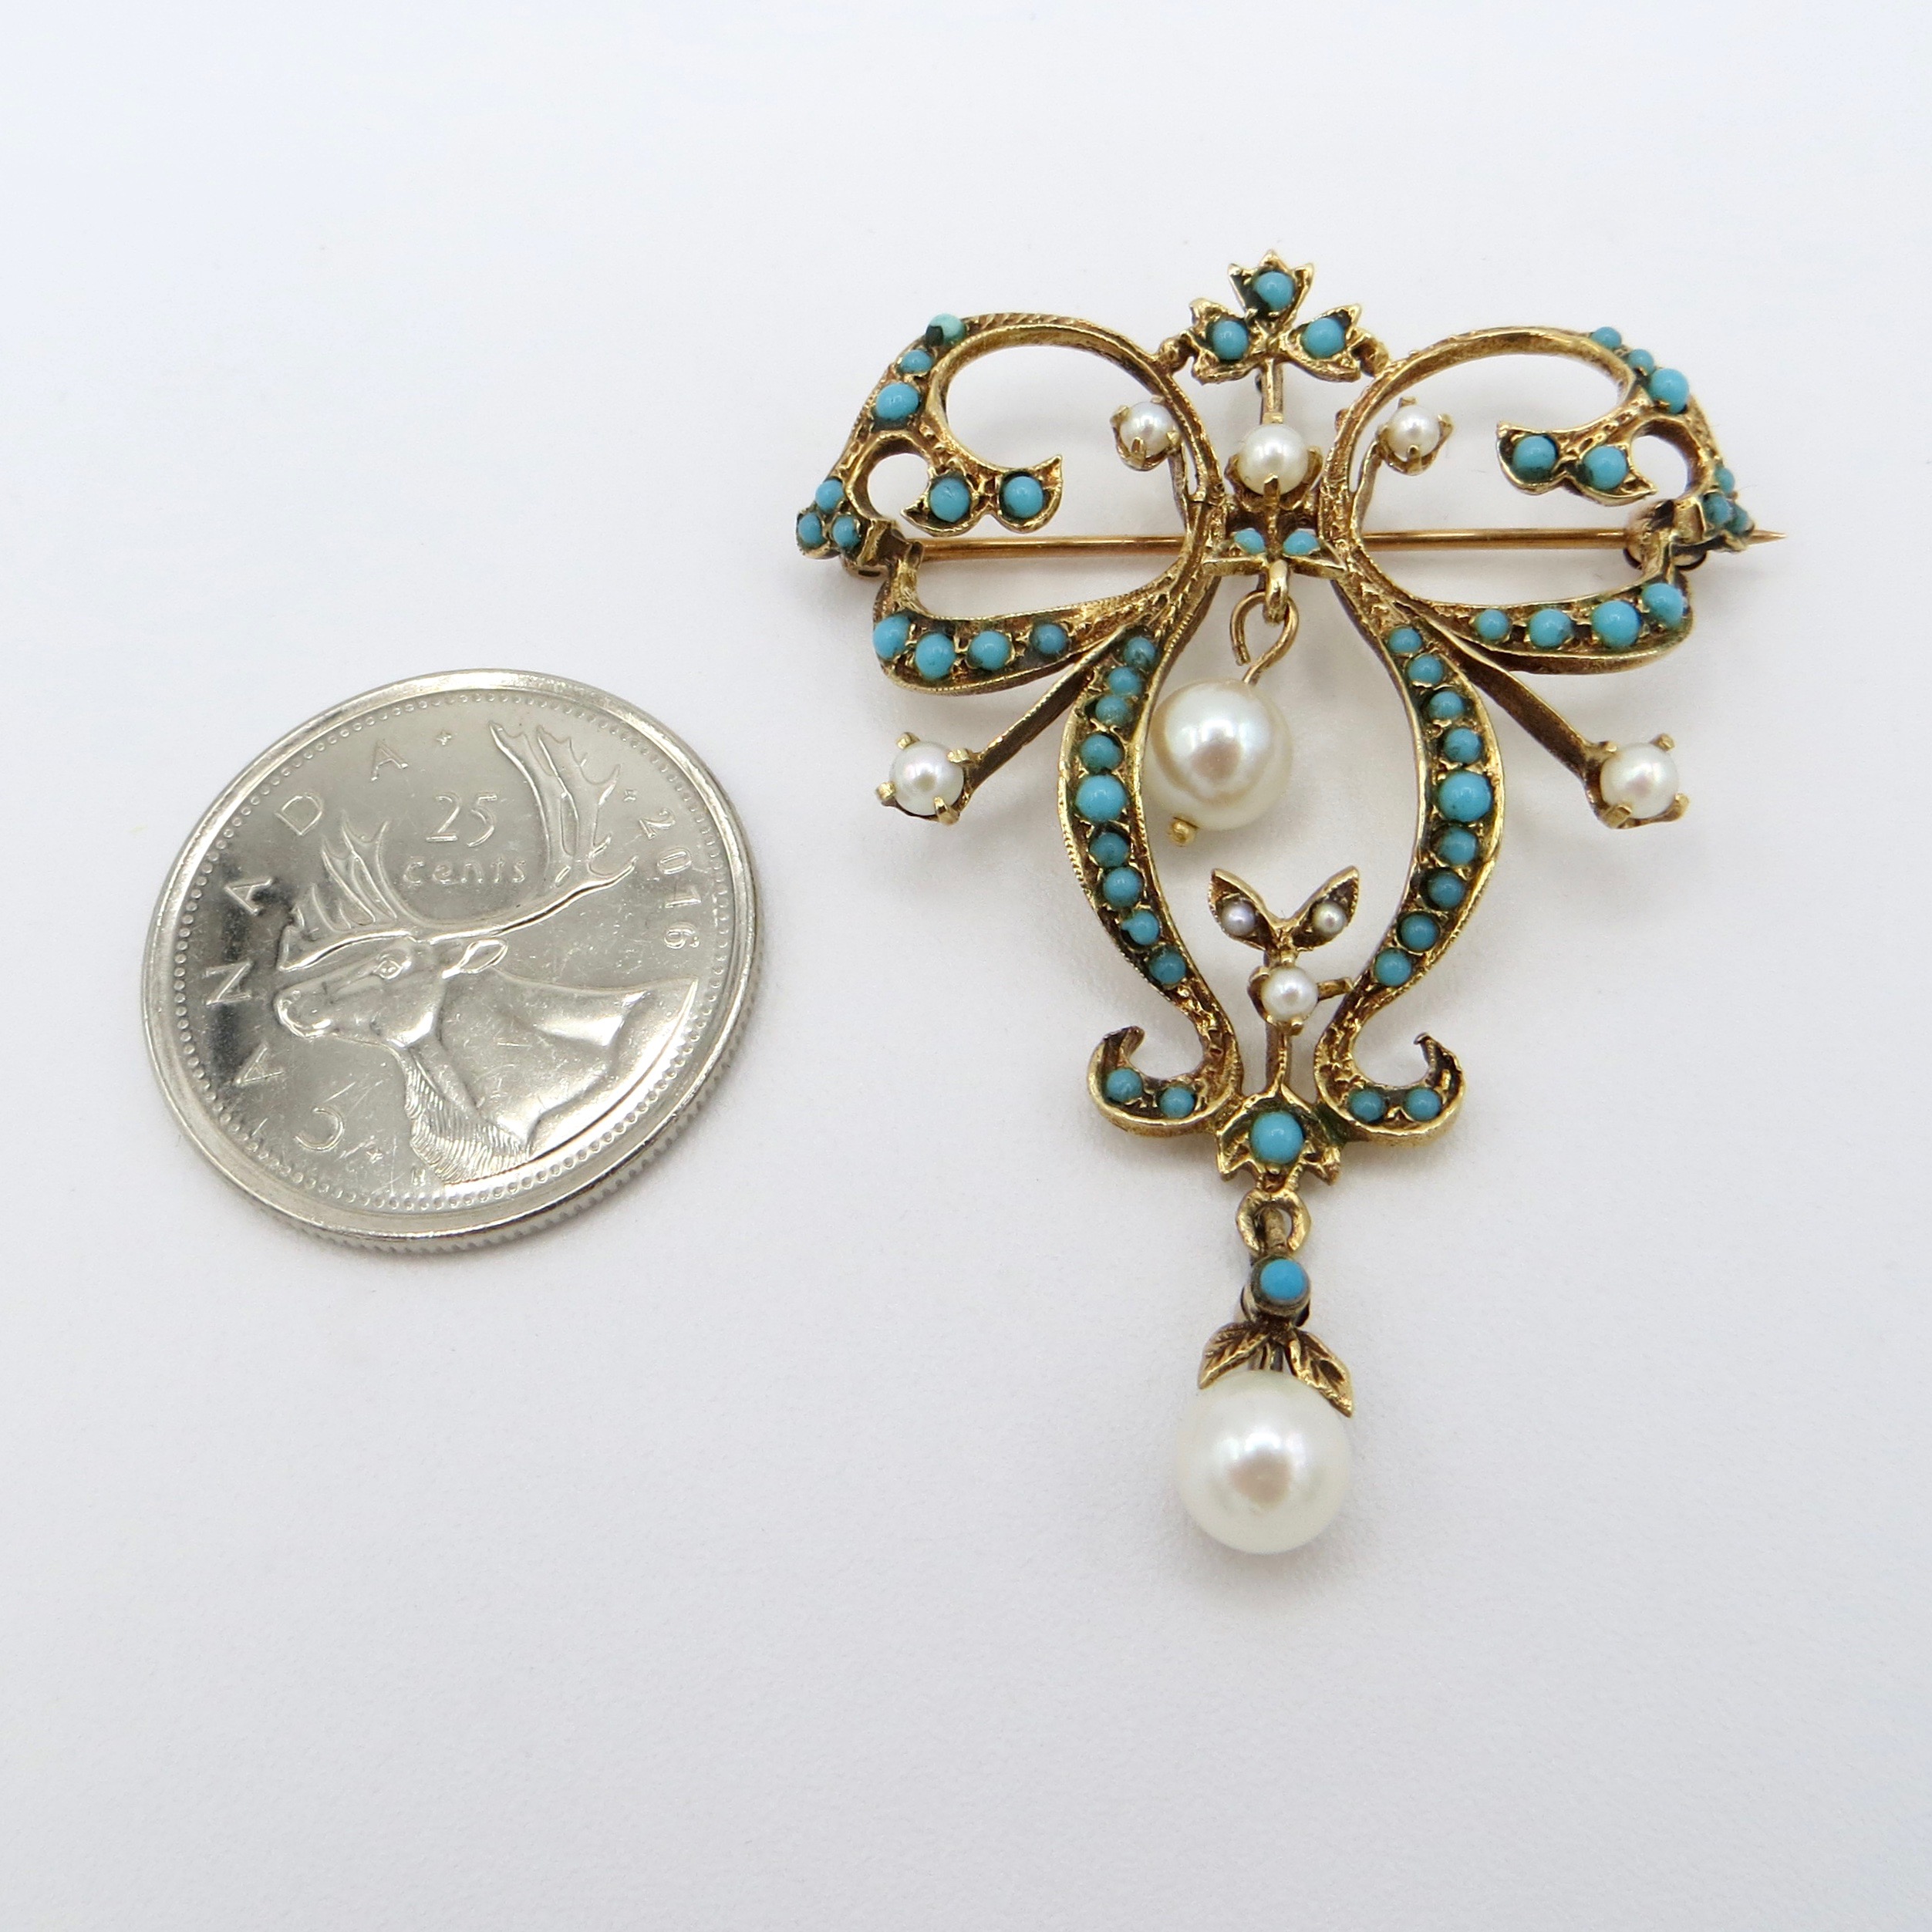 Turquoise & Pearl Brooch/Pendant